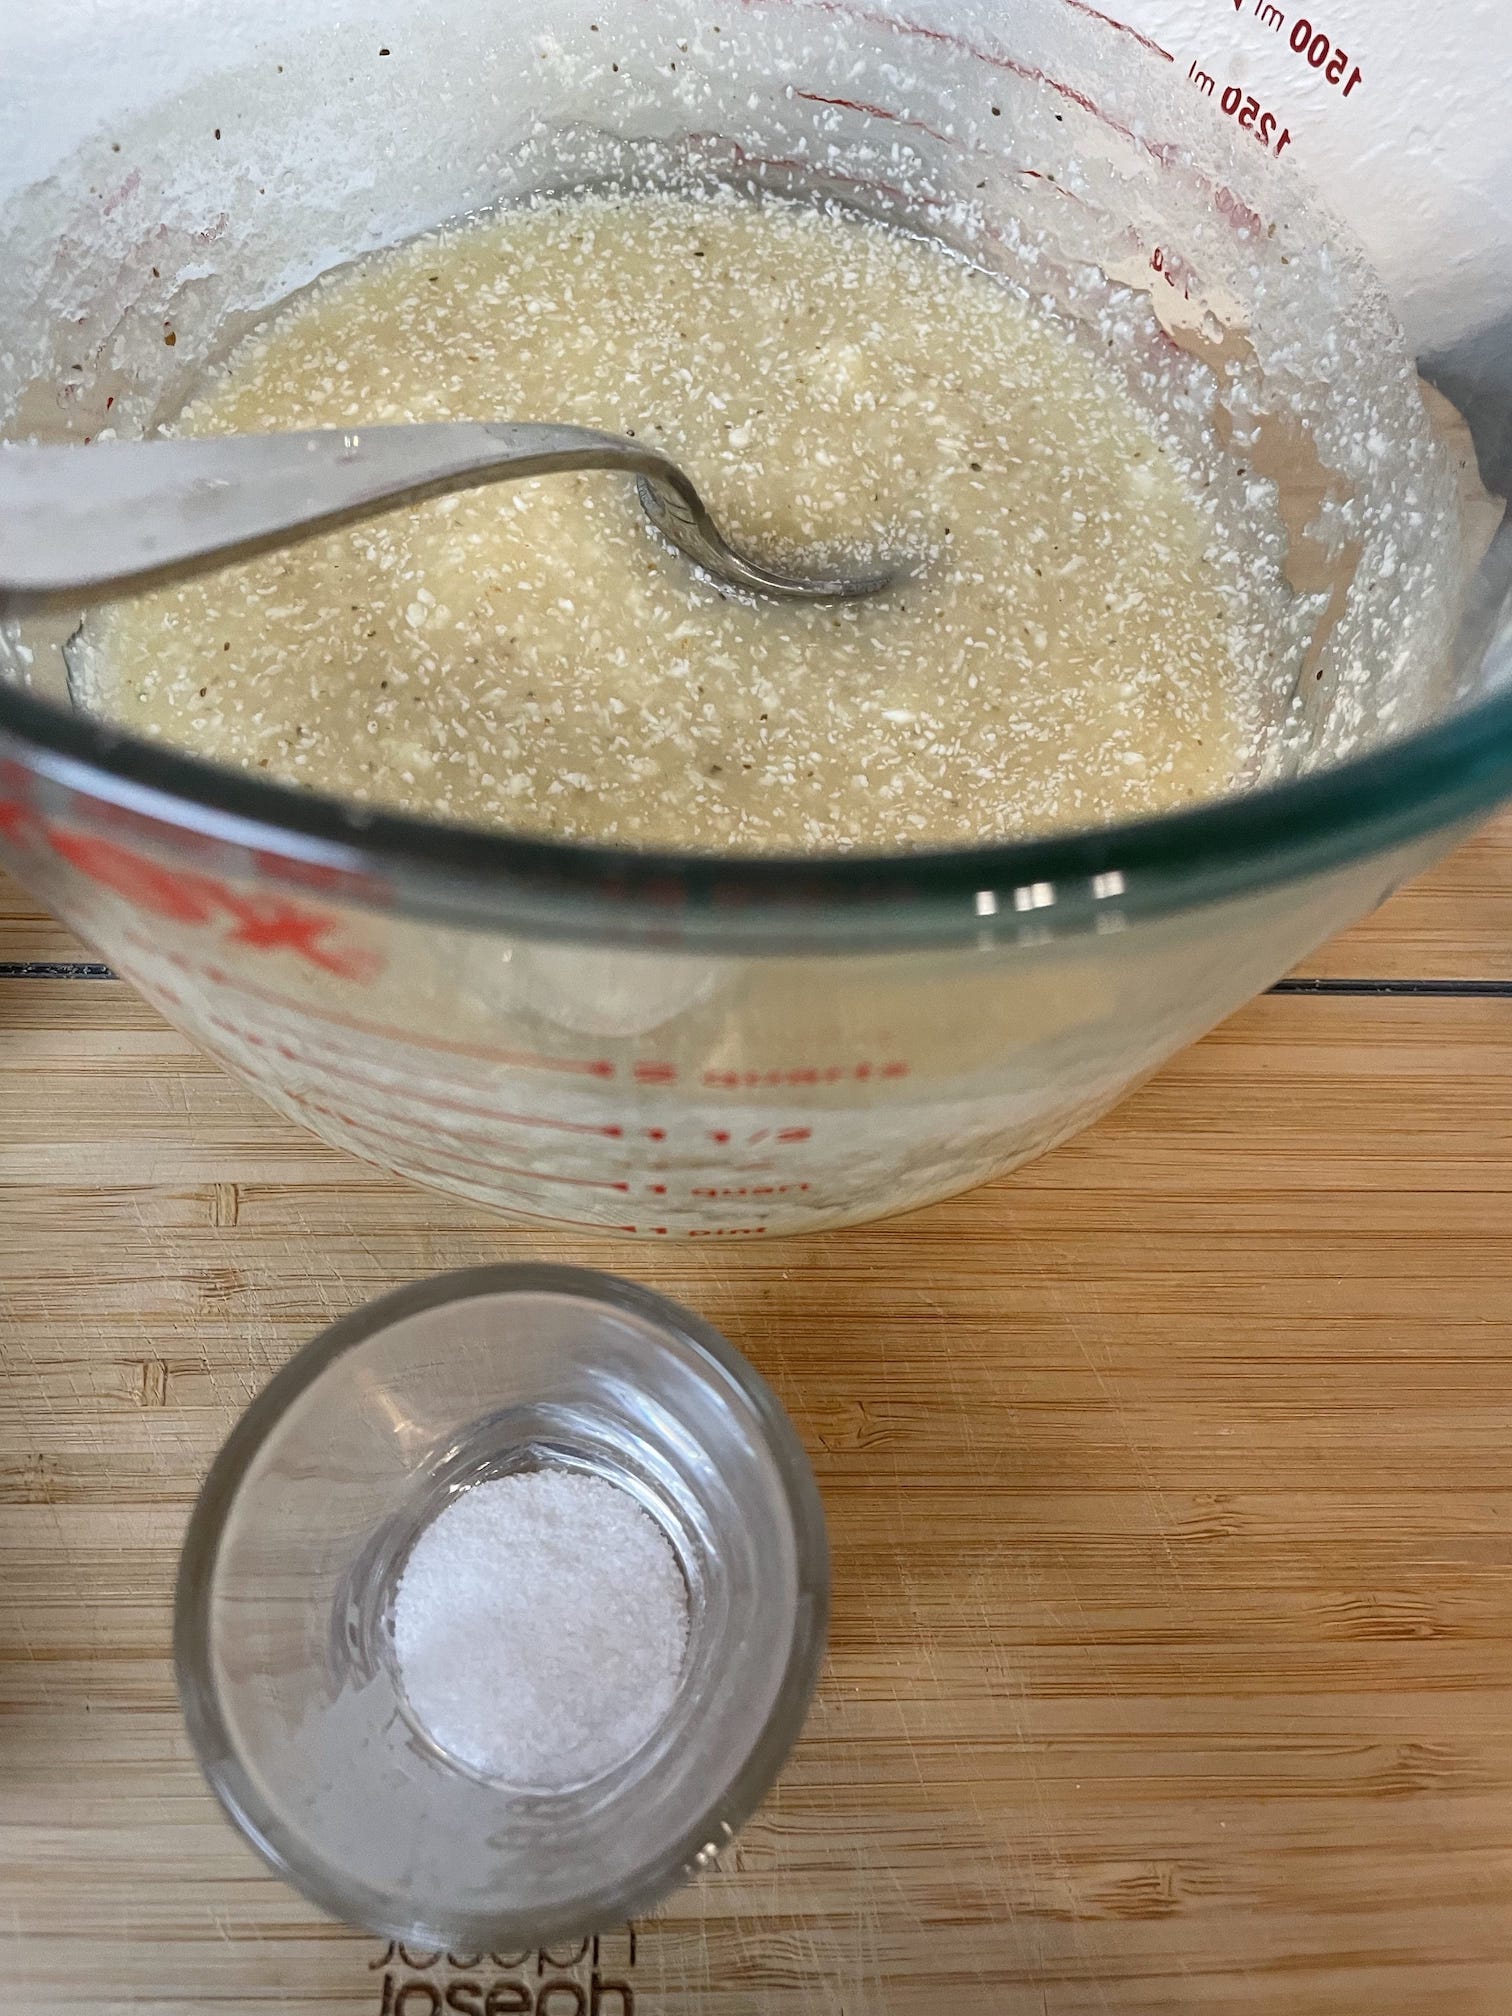 Blended pears, yeast, and the optional butter in a clear container.